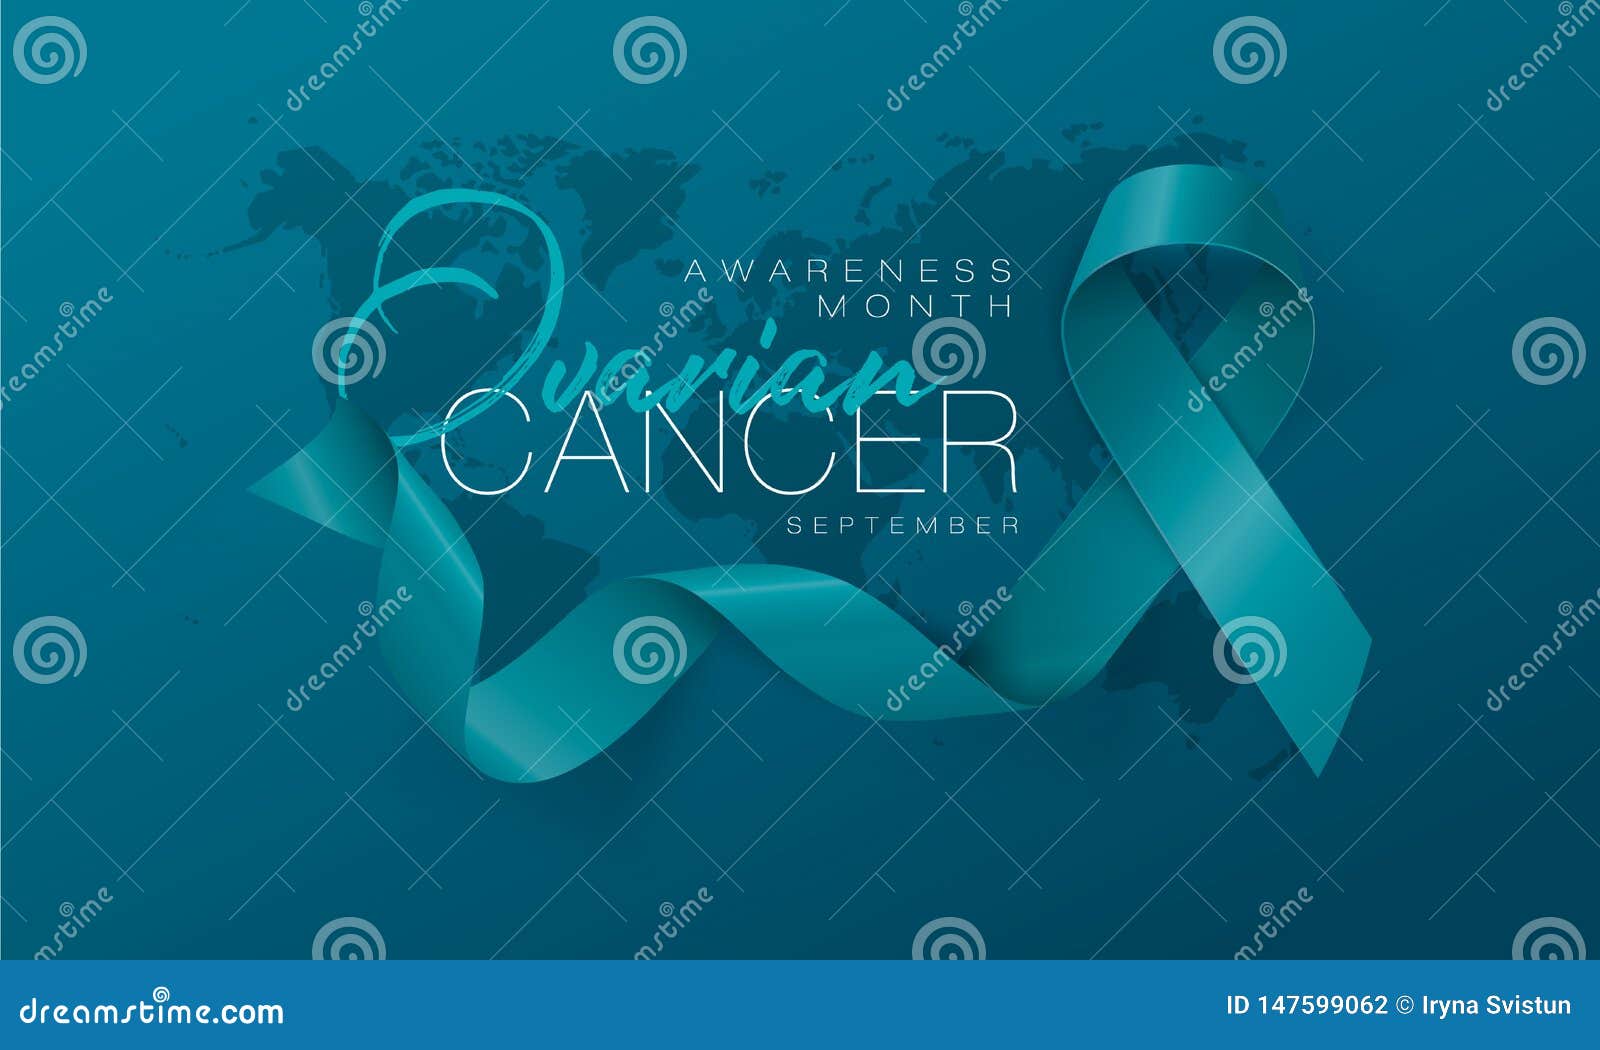 Ovarian Cancer Awareness Calligraphy Poster Design. Realistic Teal ...